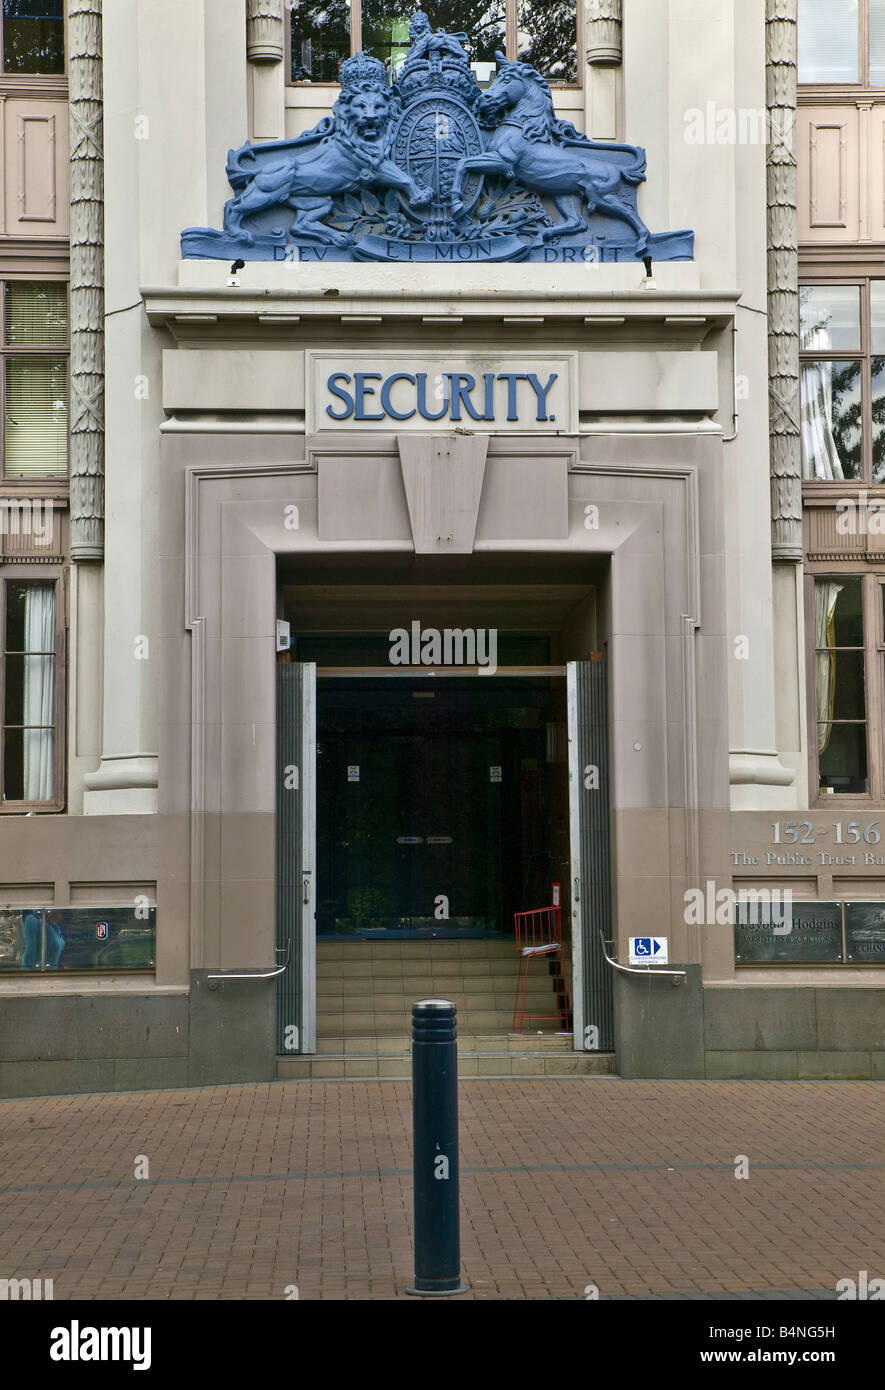 Doorway of Public Trust building with official seal and the word security above the door, Christchurch, South Island, New Zealan Stock Photo